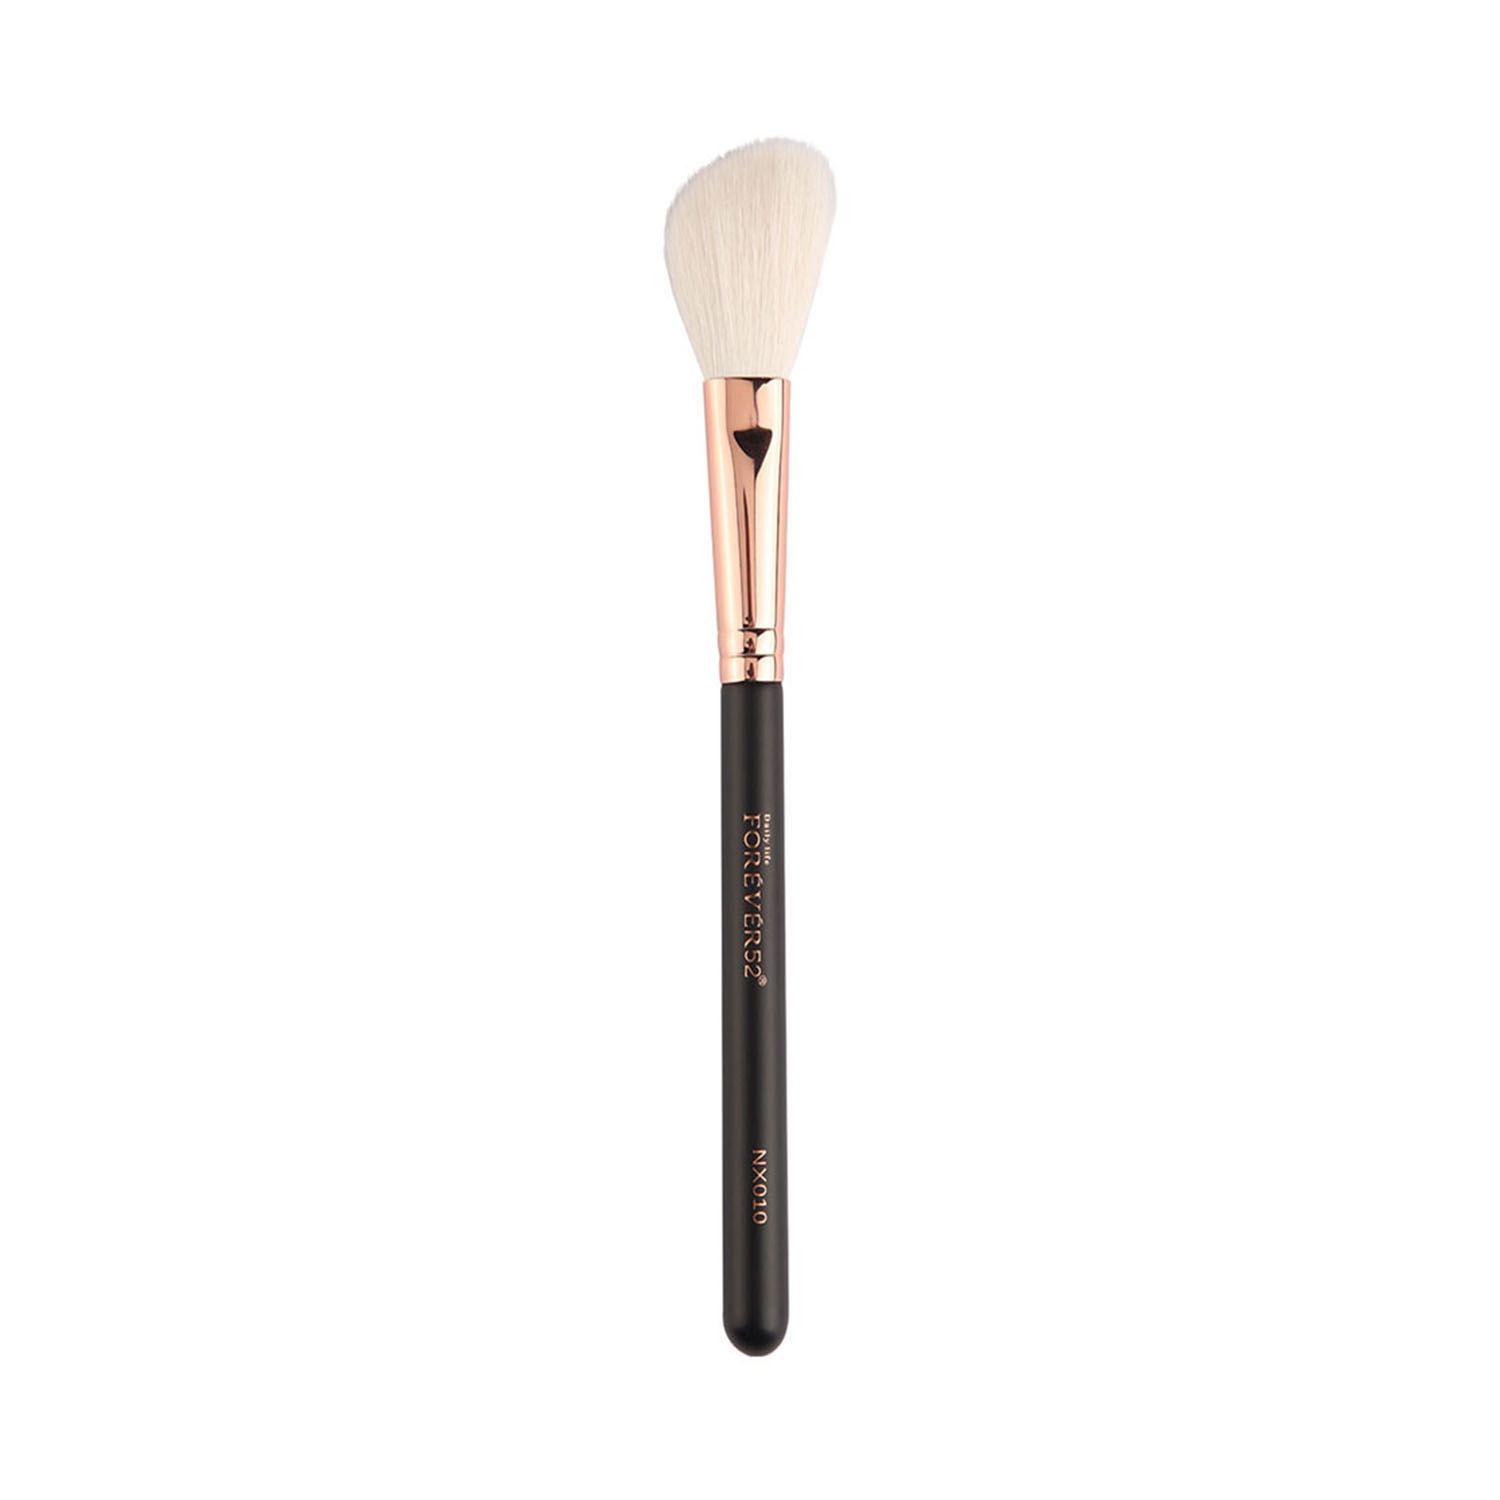 Daily Life Forever52 | Daily Life Forever52 Angled Contour Brush - NX010 (1Pc)